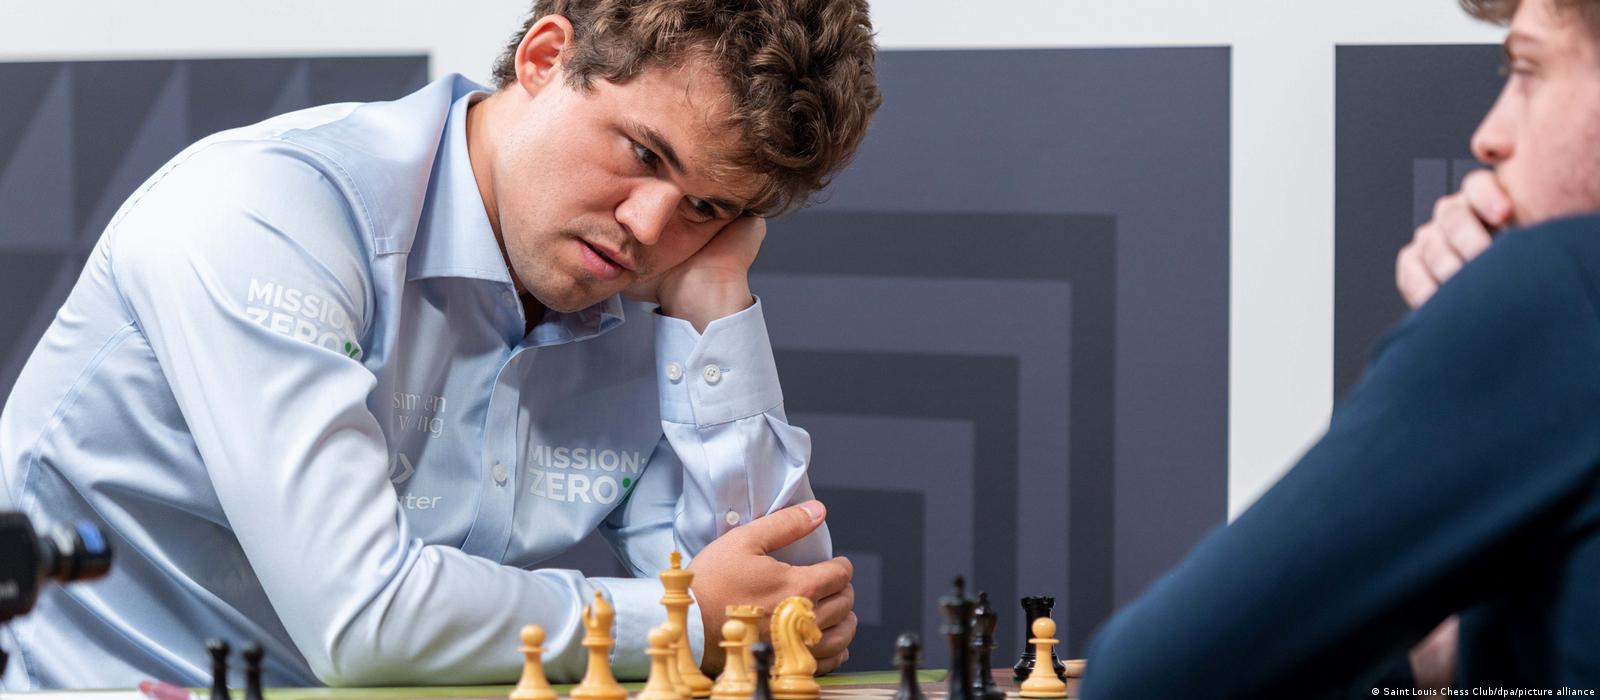 New in Chess 2022/3 - The Club Player's Magazine